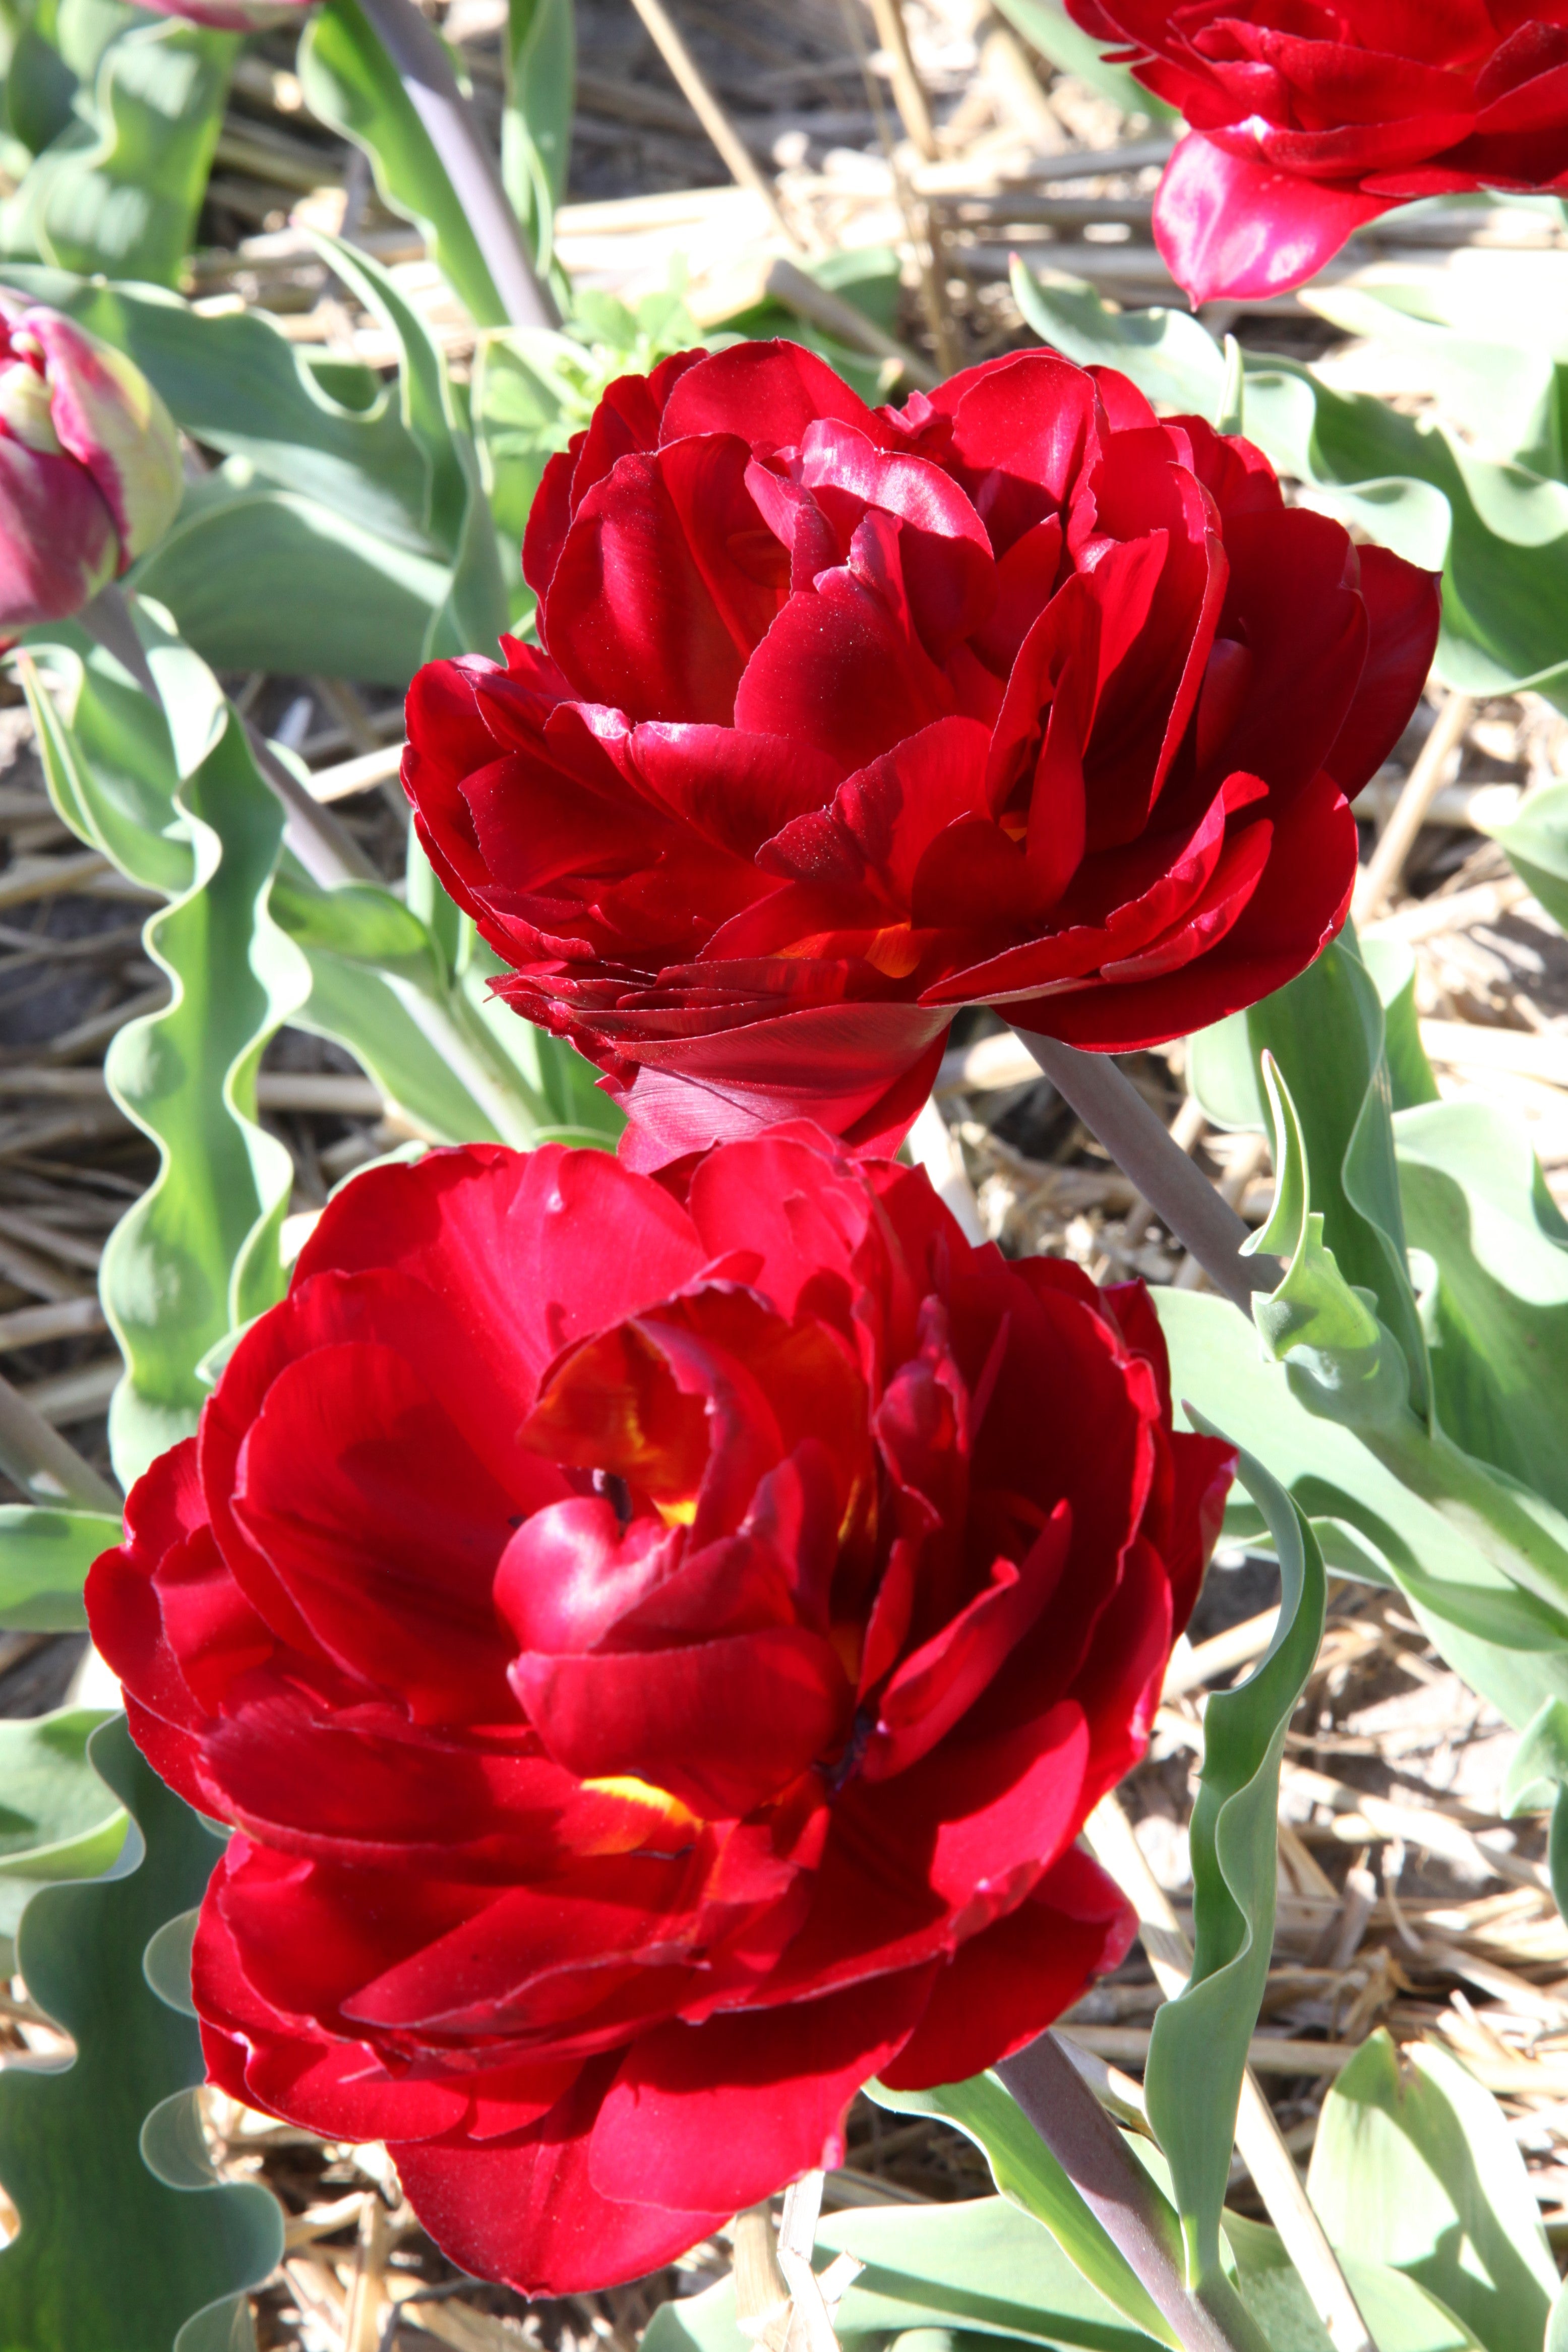 Beautiful Cranberry Kiss tulip with double layers of petals, exuding elegance